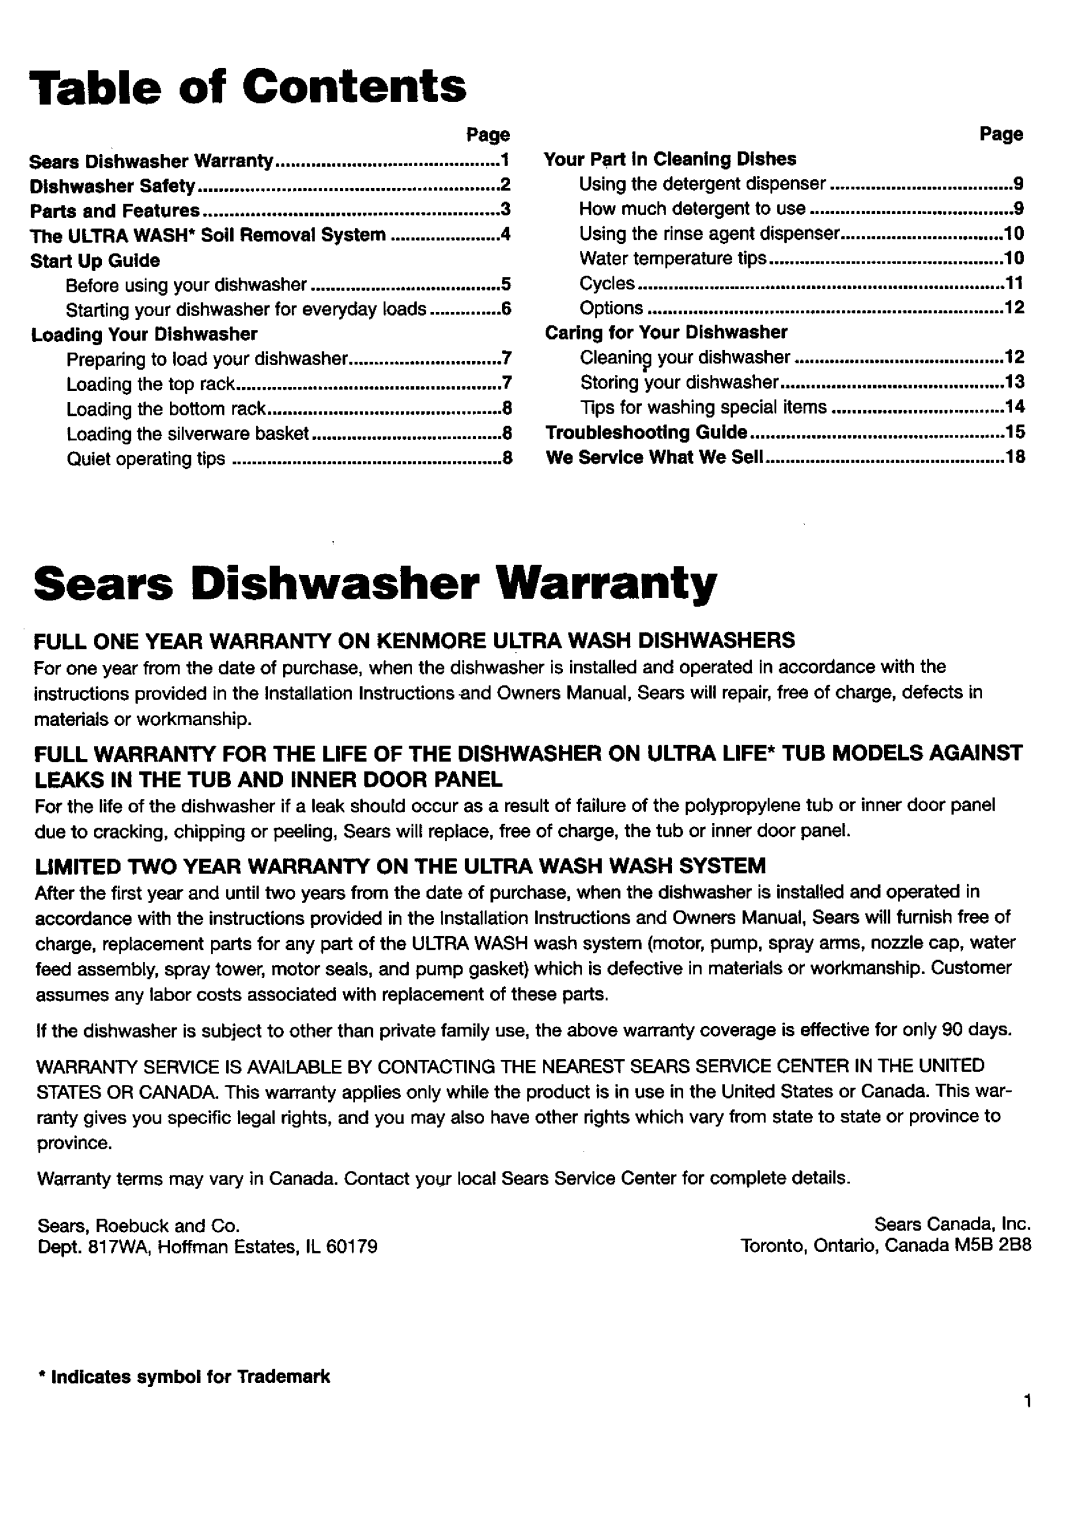 Kenmore 15592, 15595 manual of Contents, Sears Dishwasher Warranty 